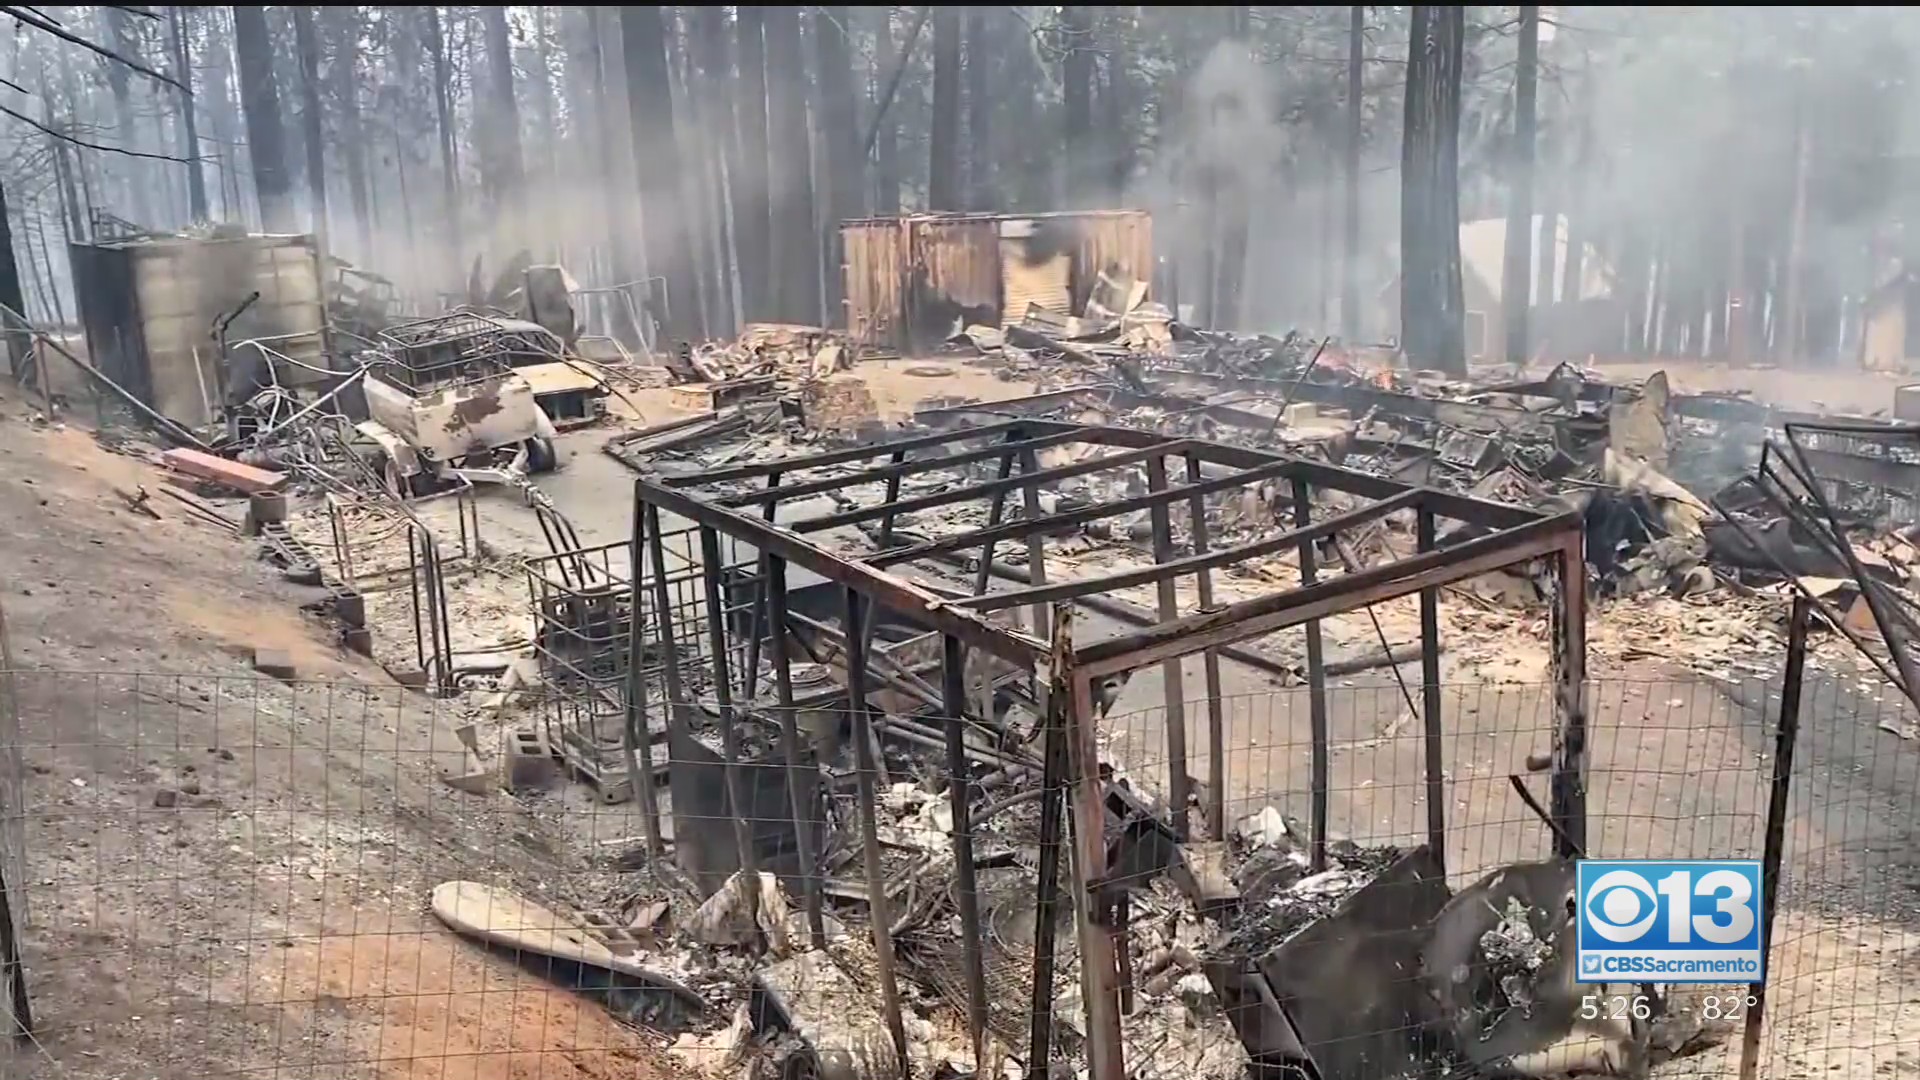 California Burning: Protections for Fire Victims, Evacuees